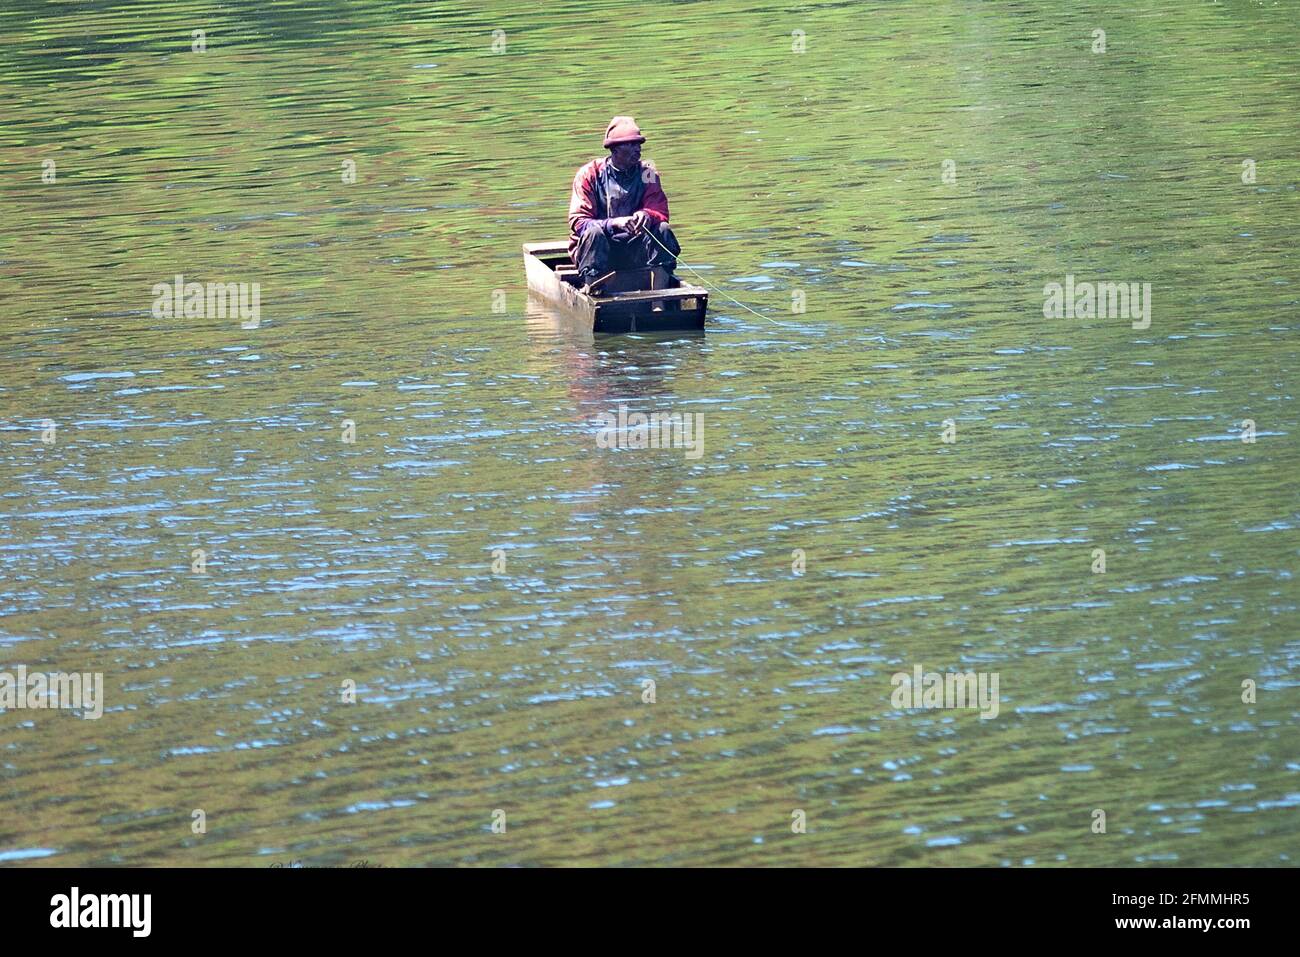 Fisherman sitting huddled in a wooden boat on a pond Stock Photo